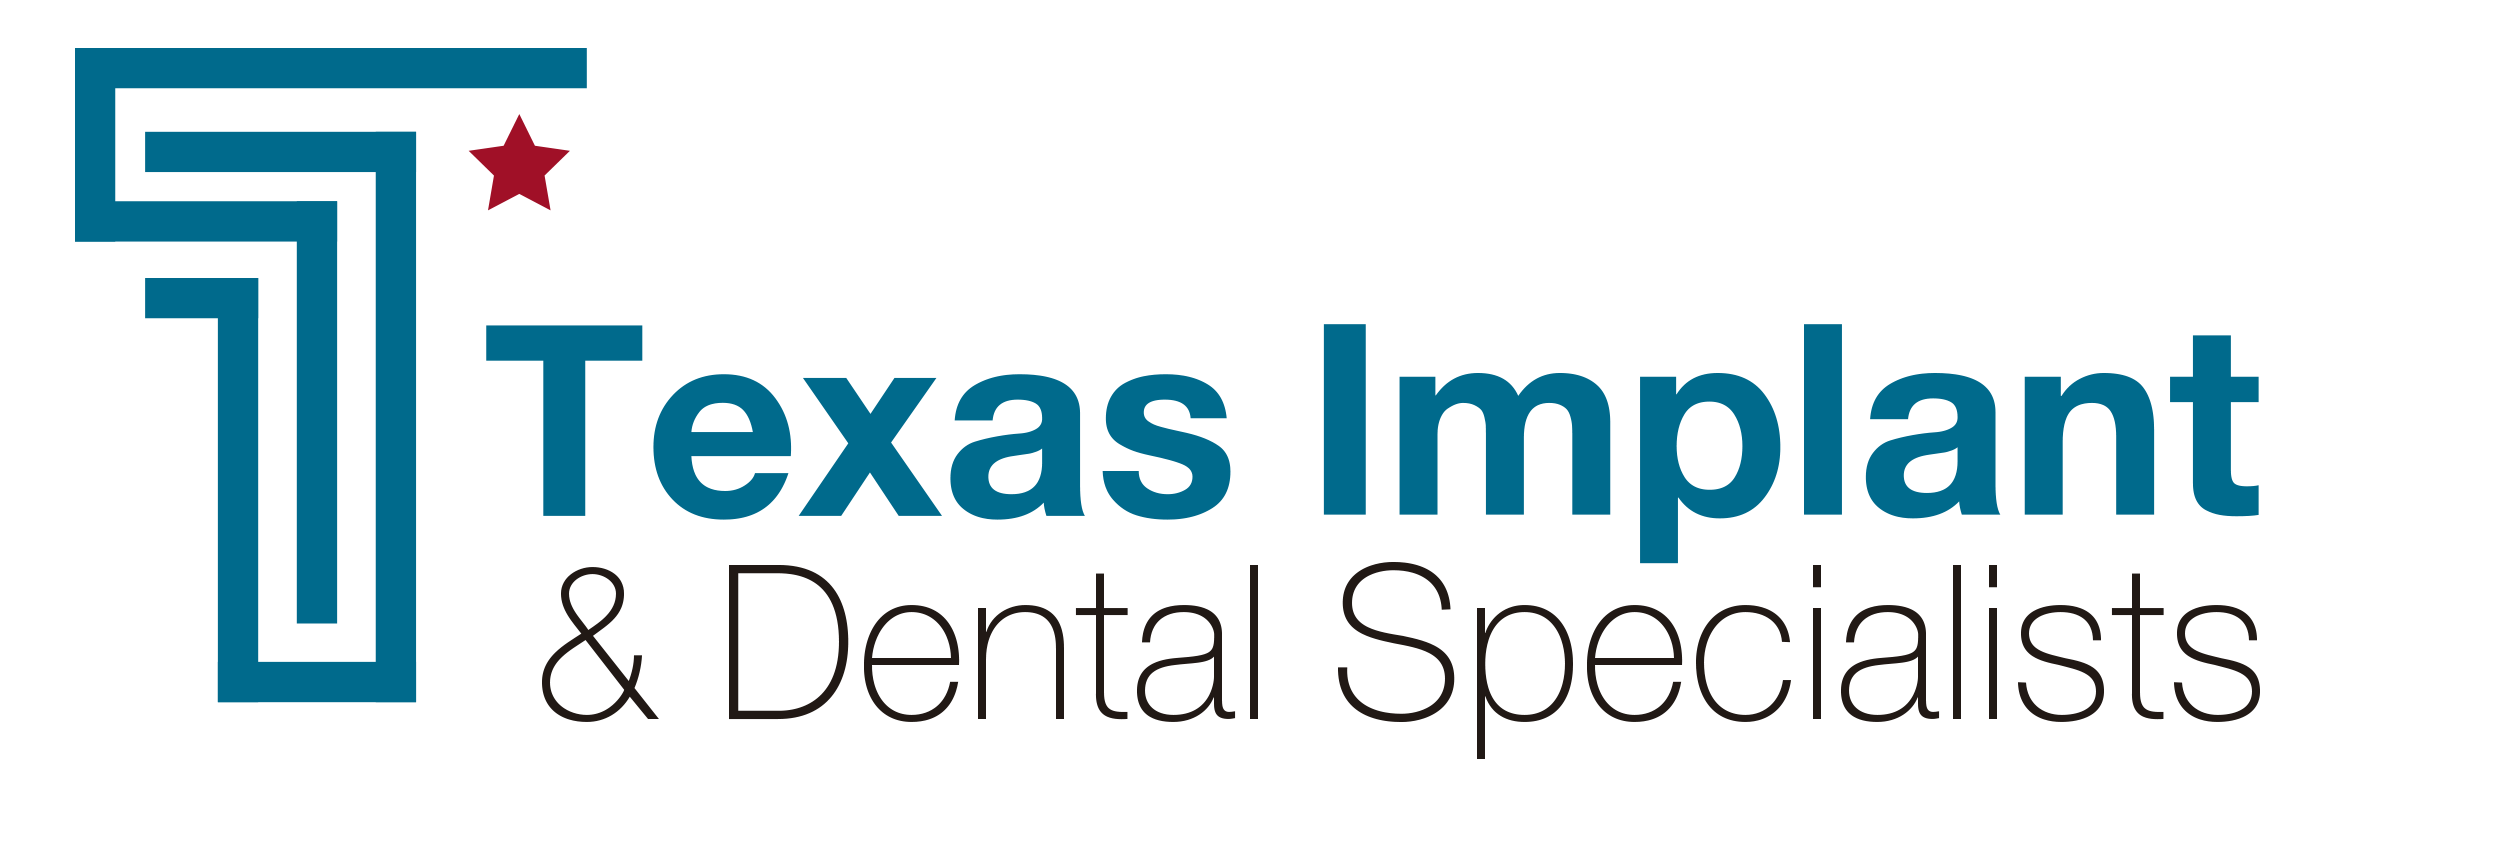 Visit Texas Implant & Dental Specialists